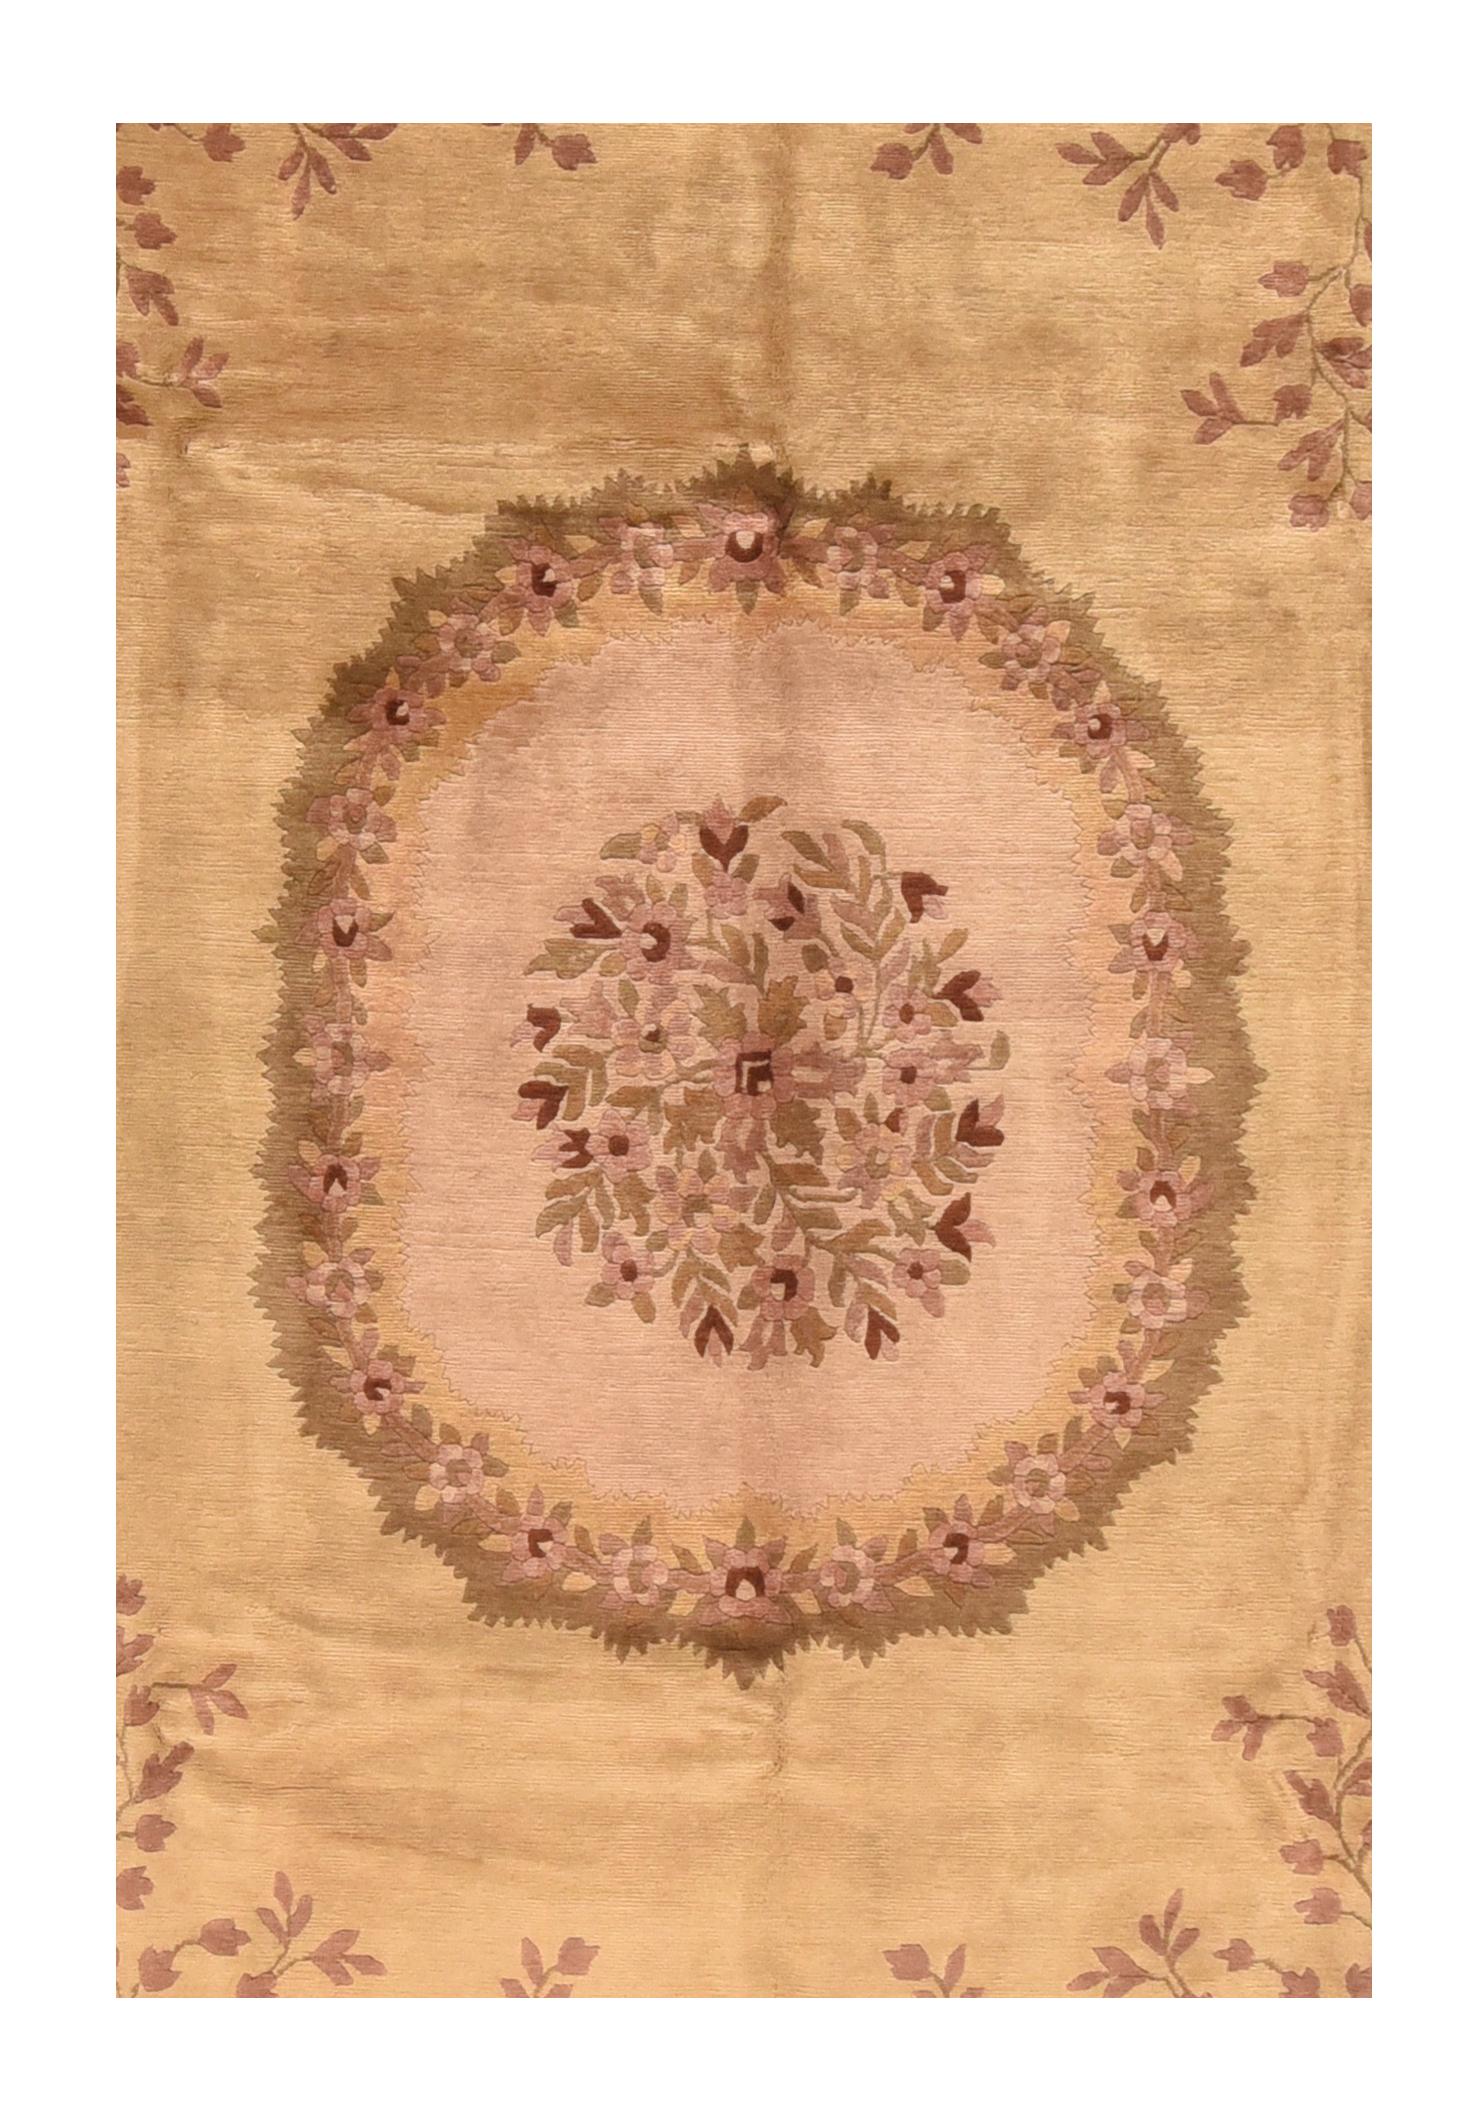 Vintage Savonnerie weave rug, hand knotted, circa 1950s

Design: Center Medallion

History of Savonnerie rugs:

The Savonnerie got its start when Henri IV (King of France from 1589-1610) became alarmed by how rapidly the national treasury was